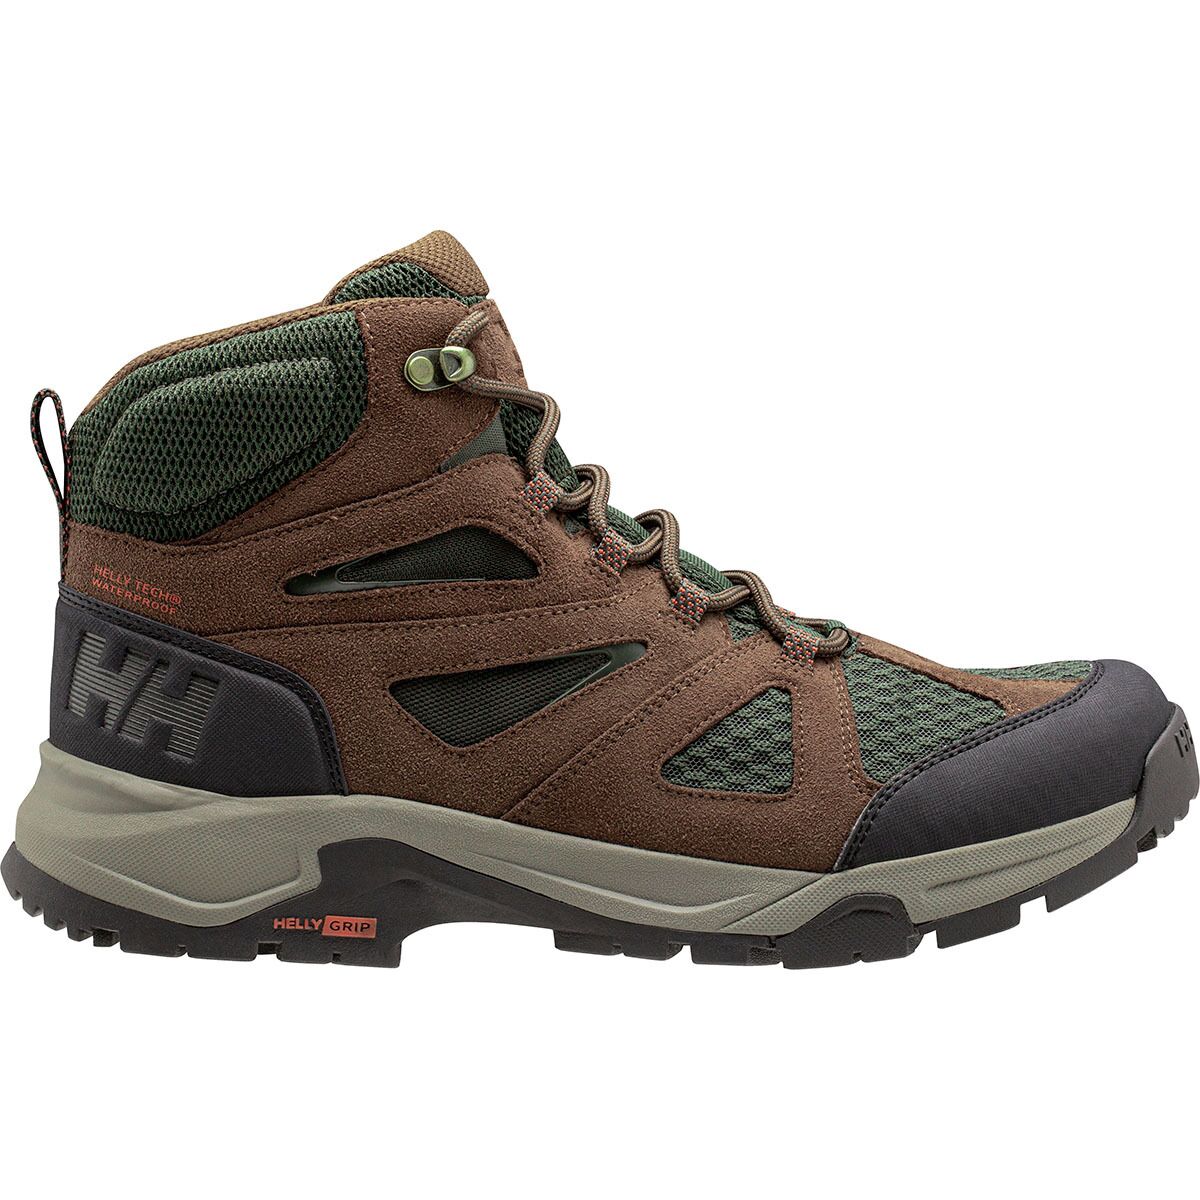 Switchback Trail HT Hiking Boot - Men